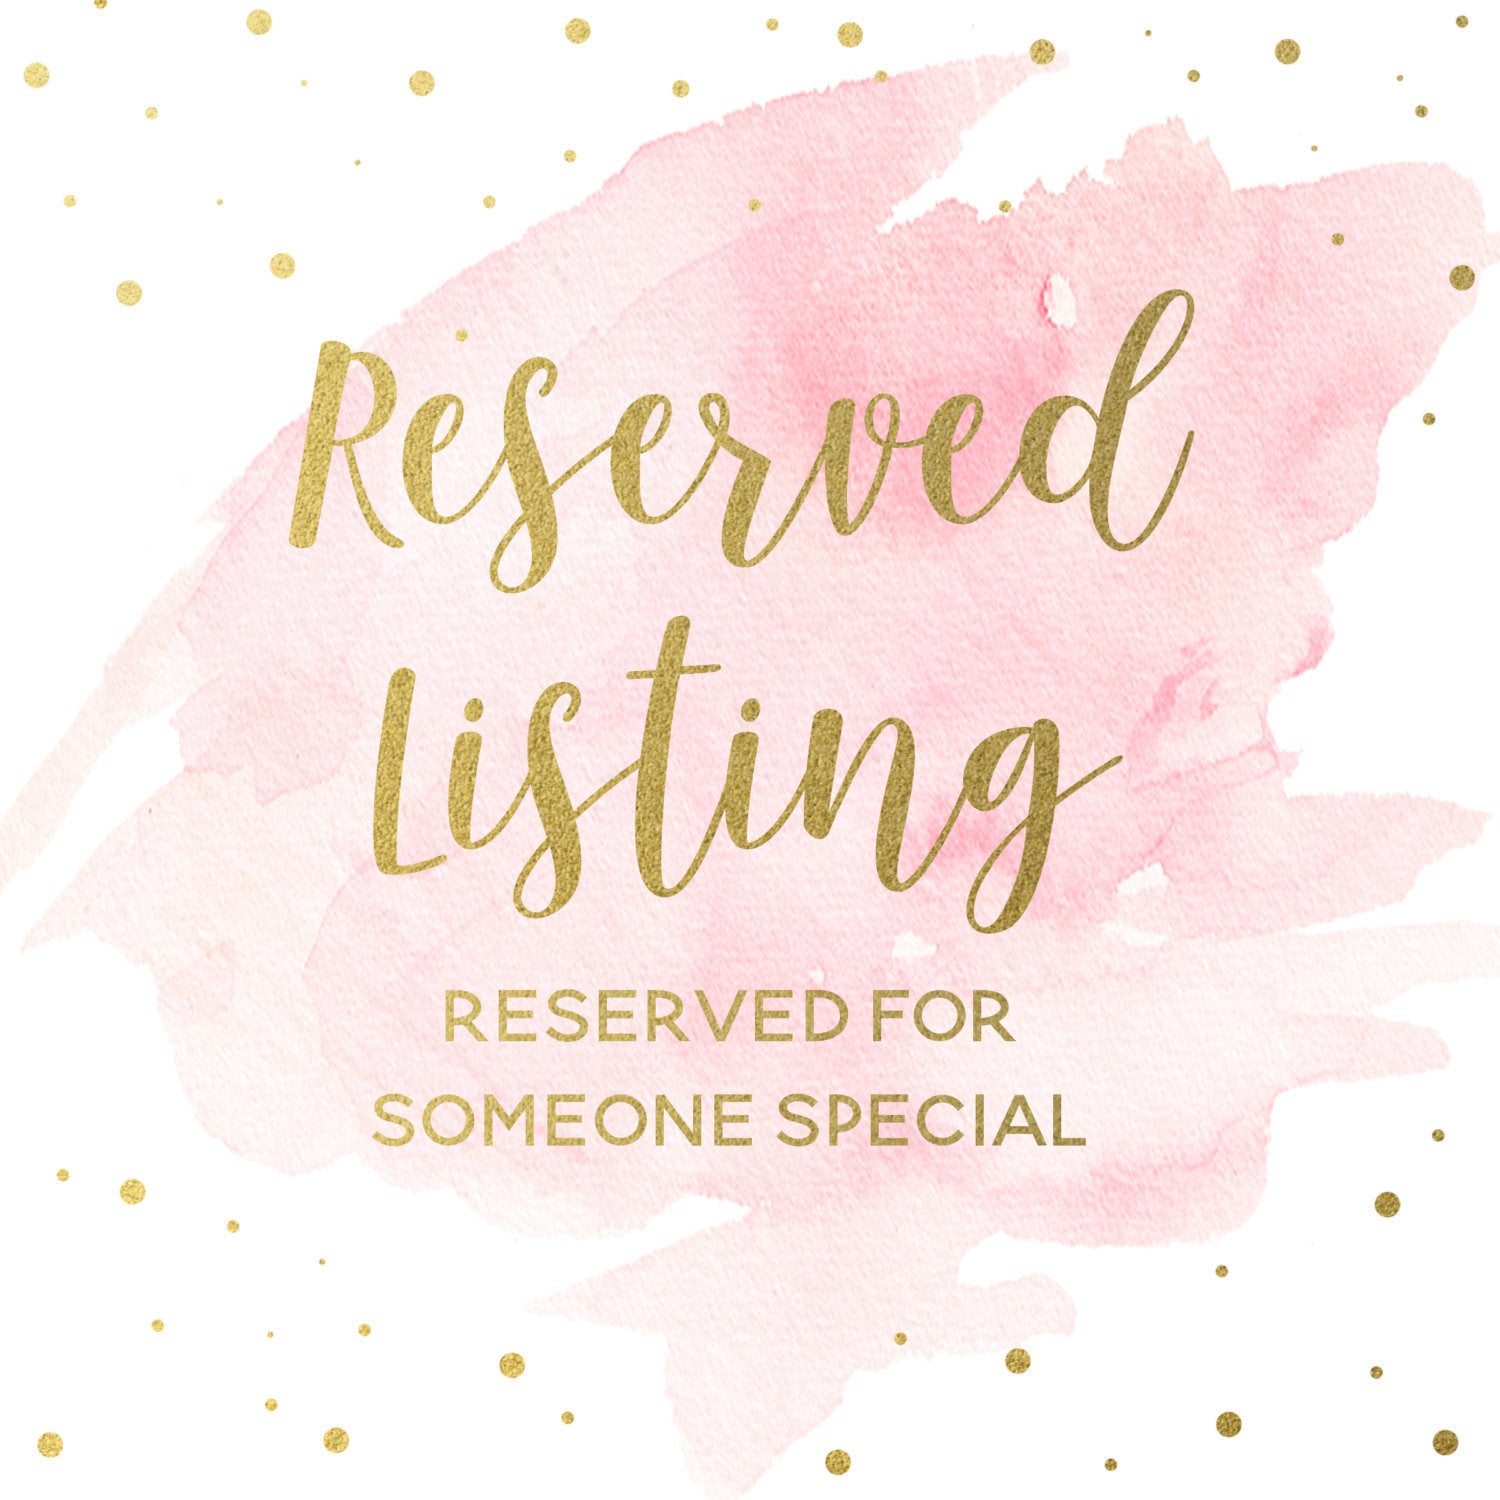 Reserved Listing - Mary K